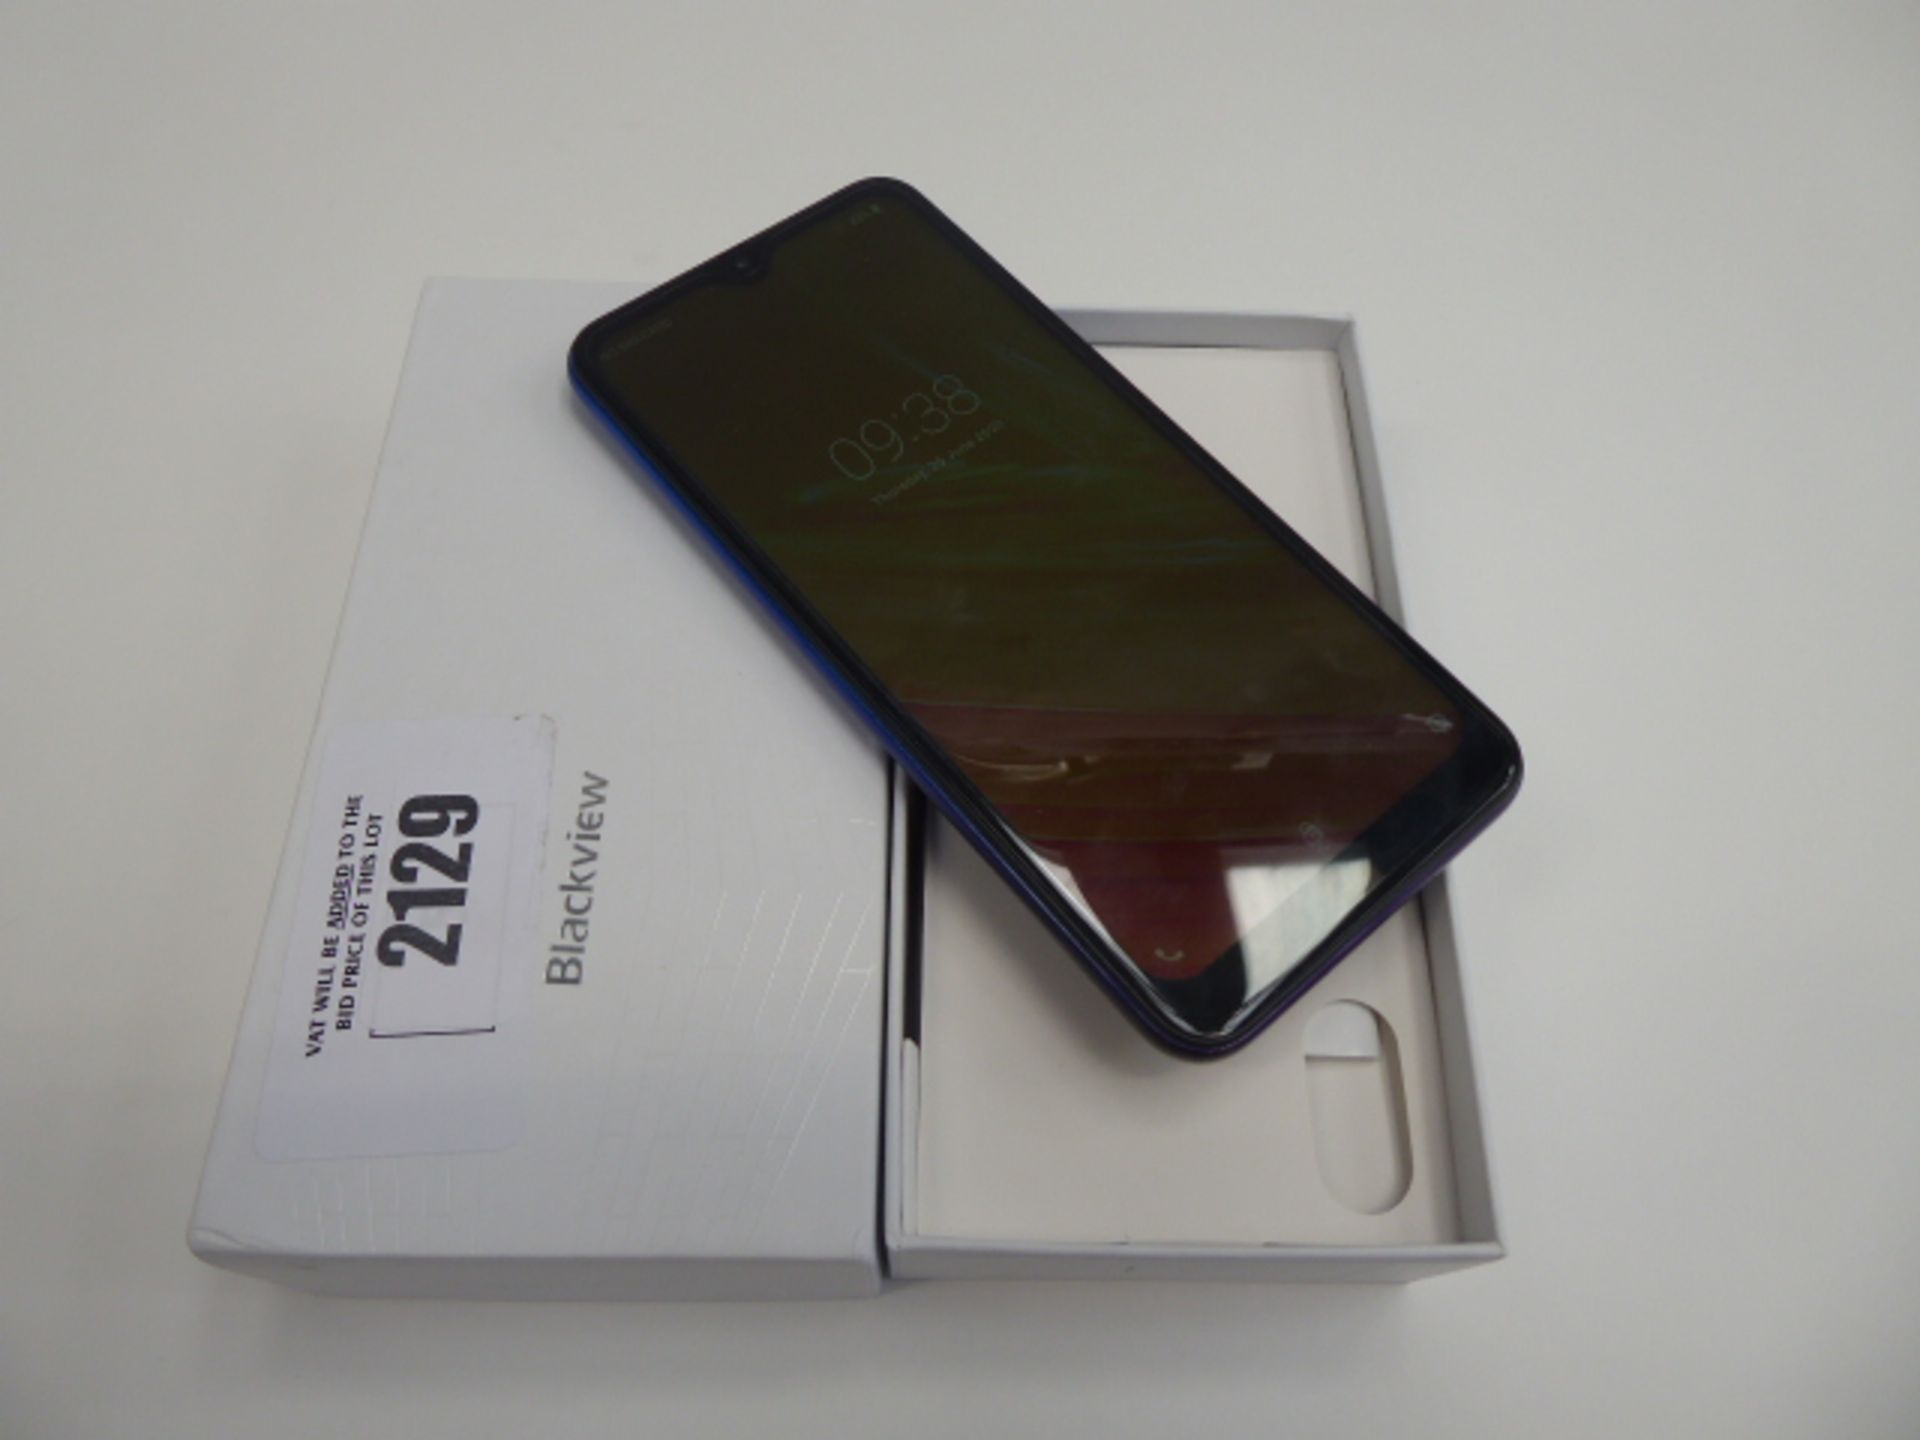 Blackview A60 16GB android smartphone in box